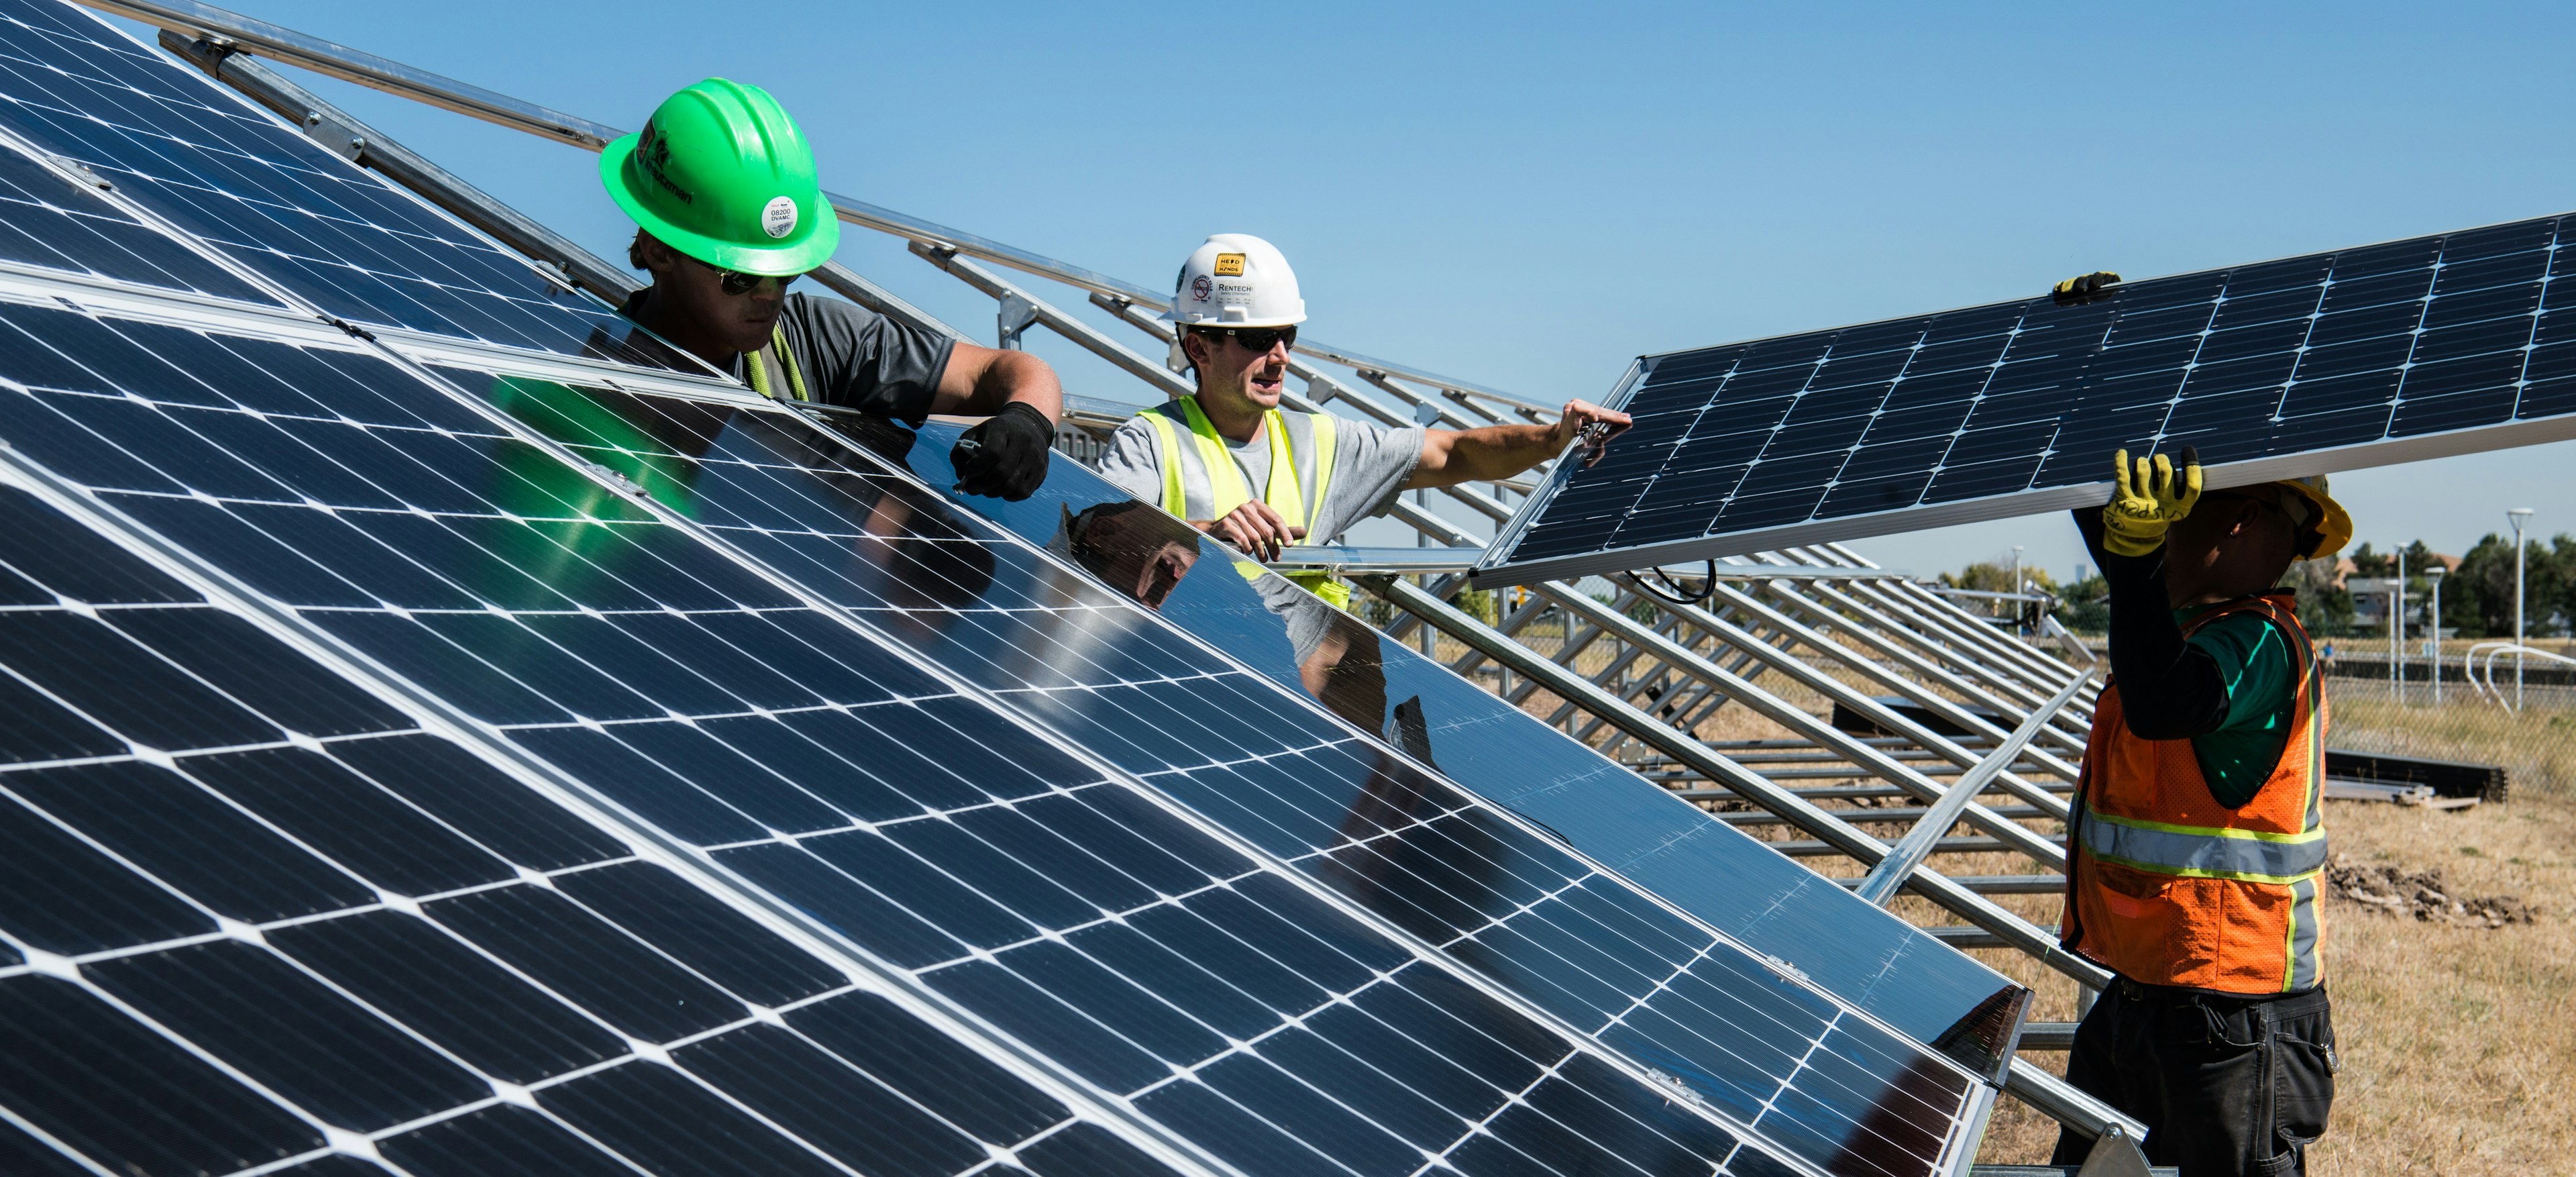 Workers wearing hardhats install solar panels at a solar field